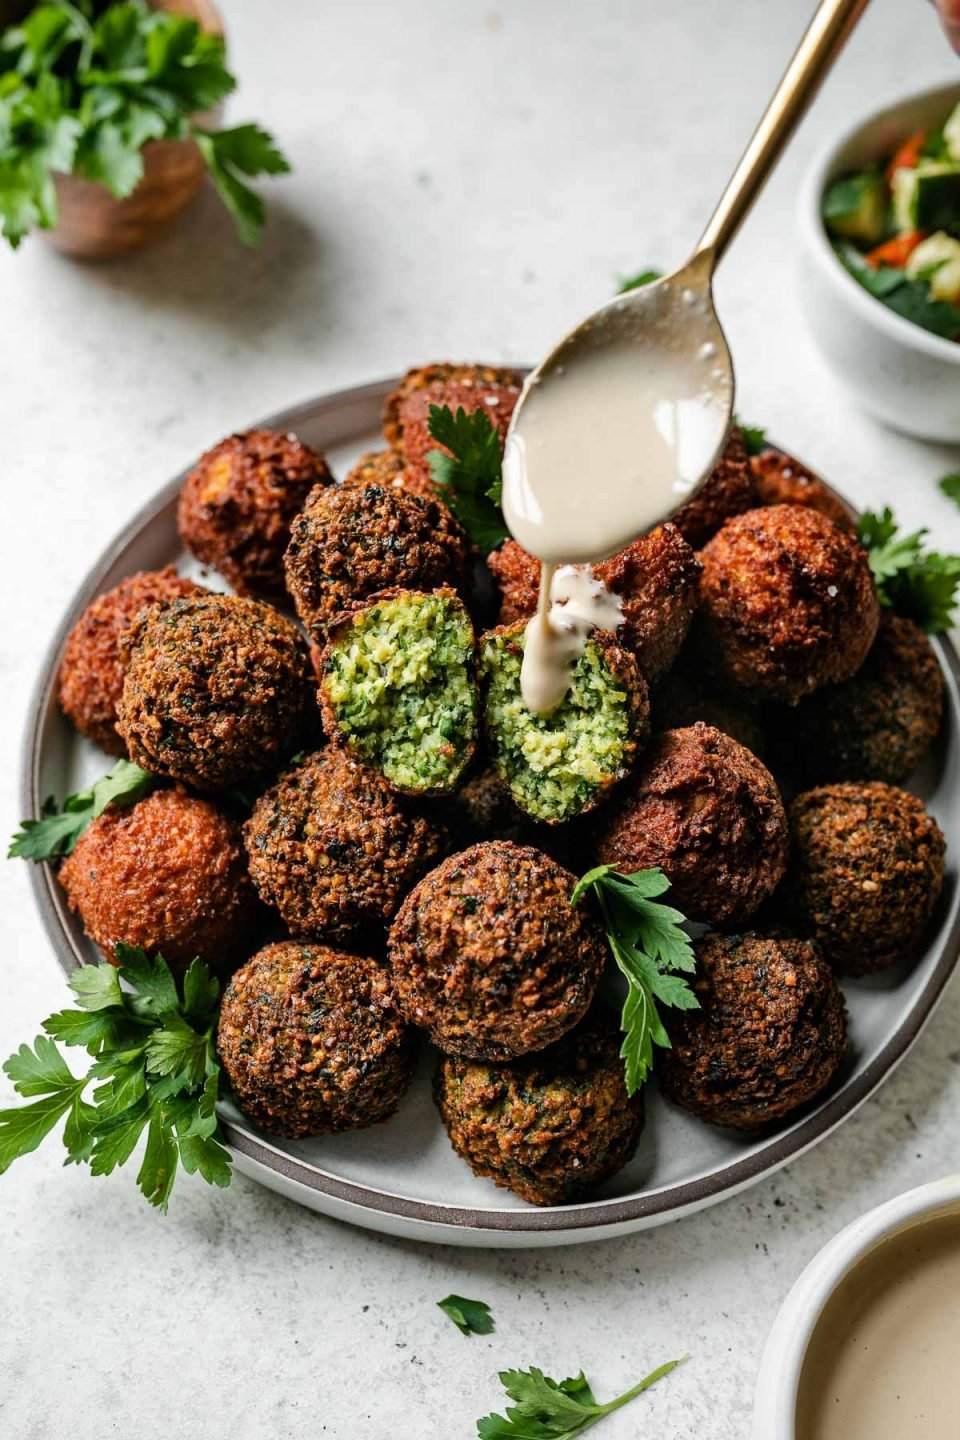 Browned & crispy cooked spicy red harissa and herby green falafel balls arranged on a gray ceramic plate. The plate sits atop a creamy white textured surface and is garnished with fresh parsley leaves. Two small white bowls filled with seasoned diced cucumber and tomatoes and tahini sauce, respectively surround the plate as well as a small bowl filled with a small bunch of fresh parsley. A gold spoon that holds a spoonful of tahini sauce is being held above the plate of falafel & used to drizzle tahini sauce atop the falafel balls.